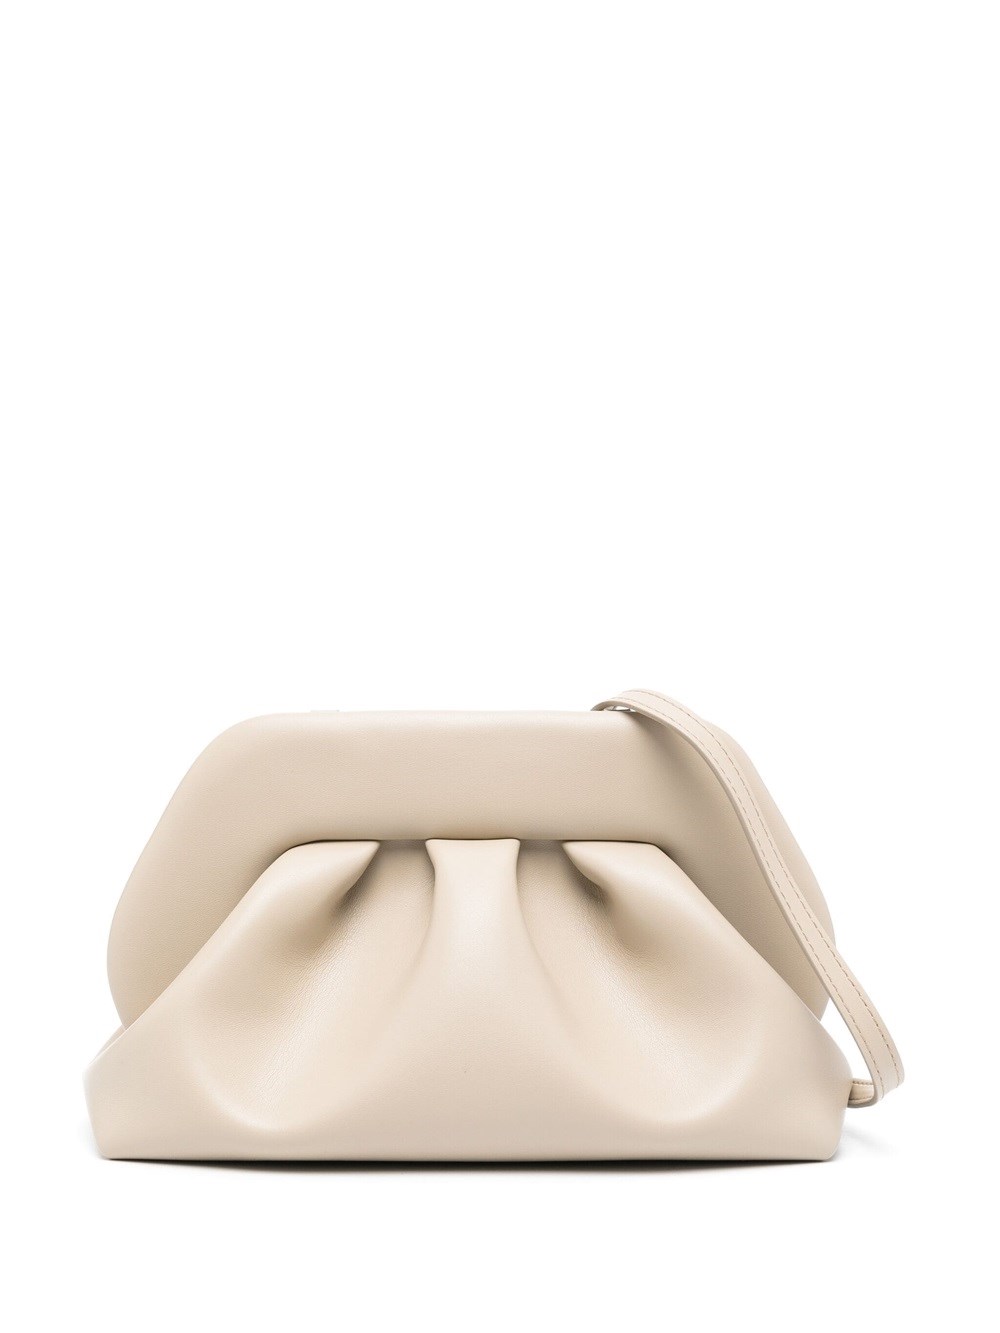 Themoire' Tia Shoulder Bag With Ruffles In Nude & Neutrals